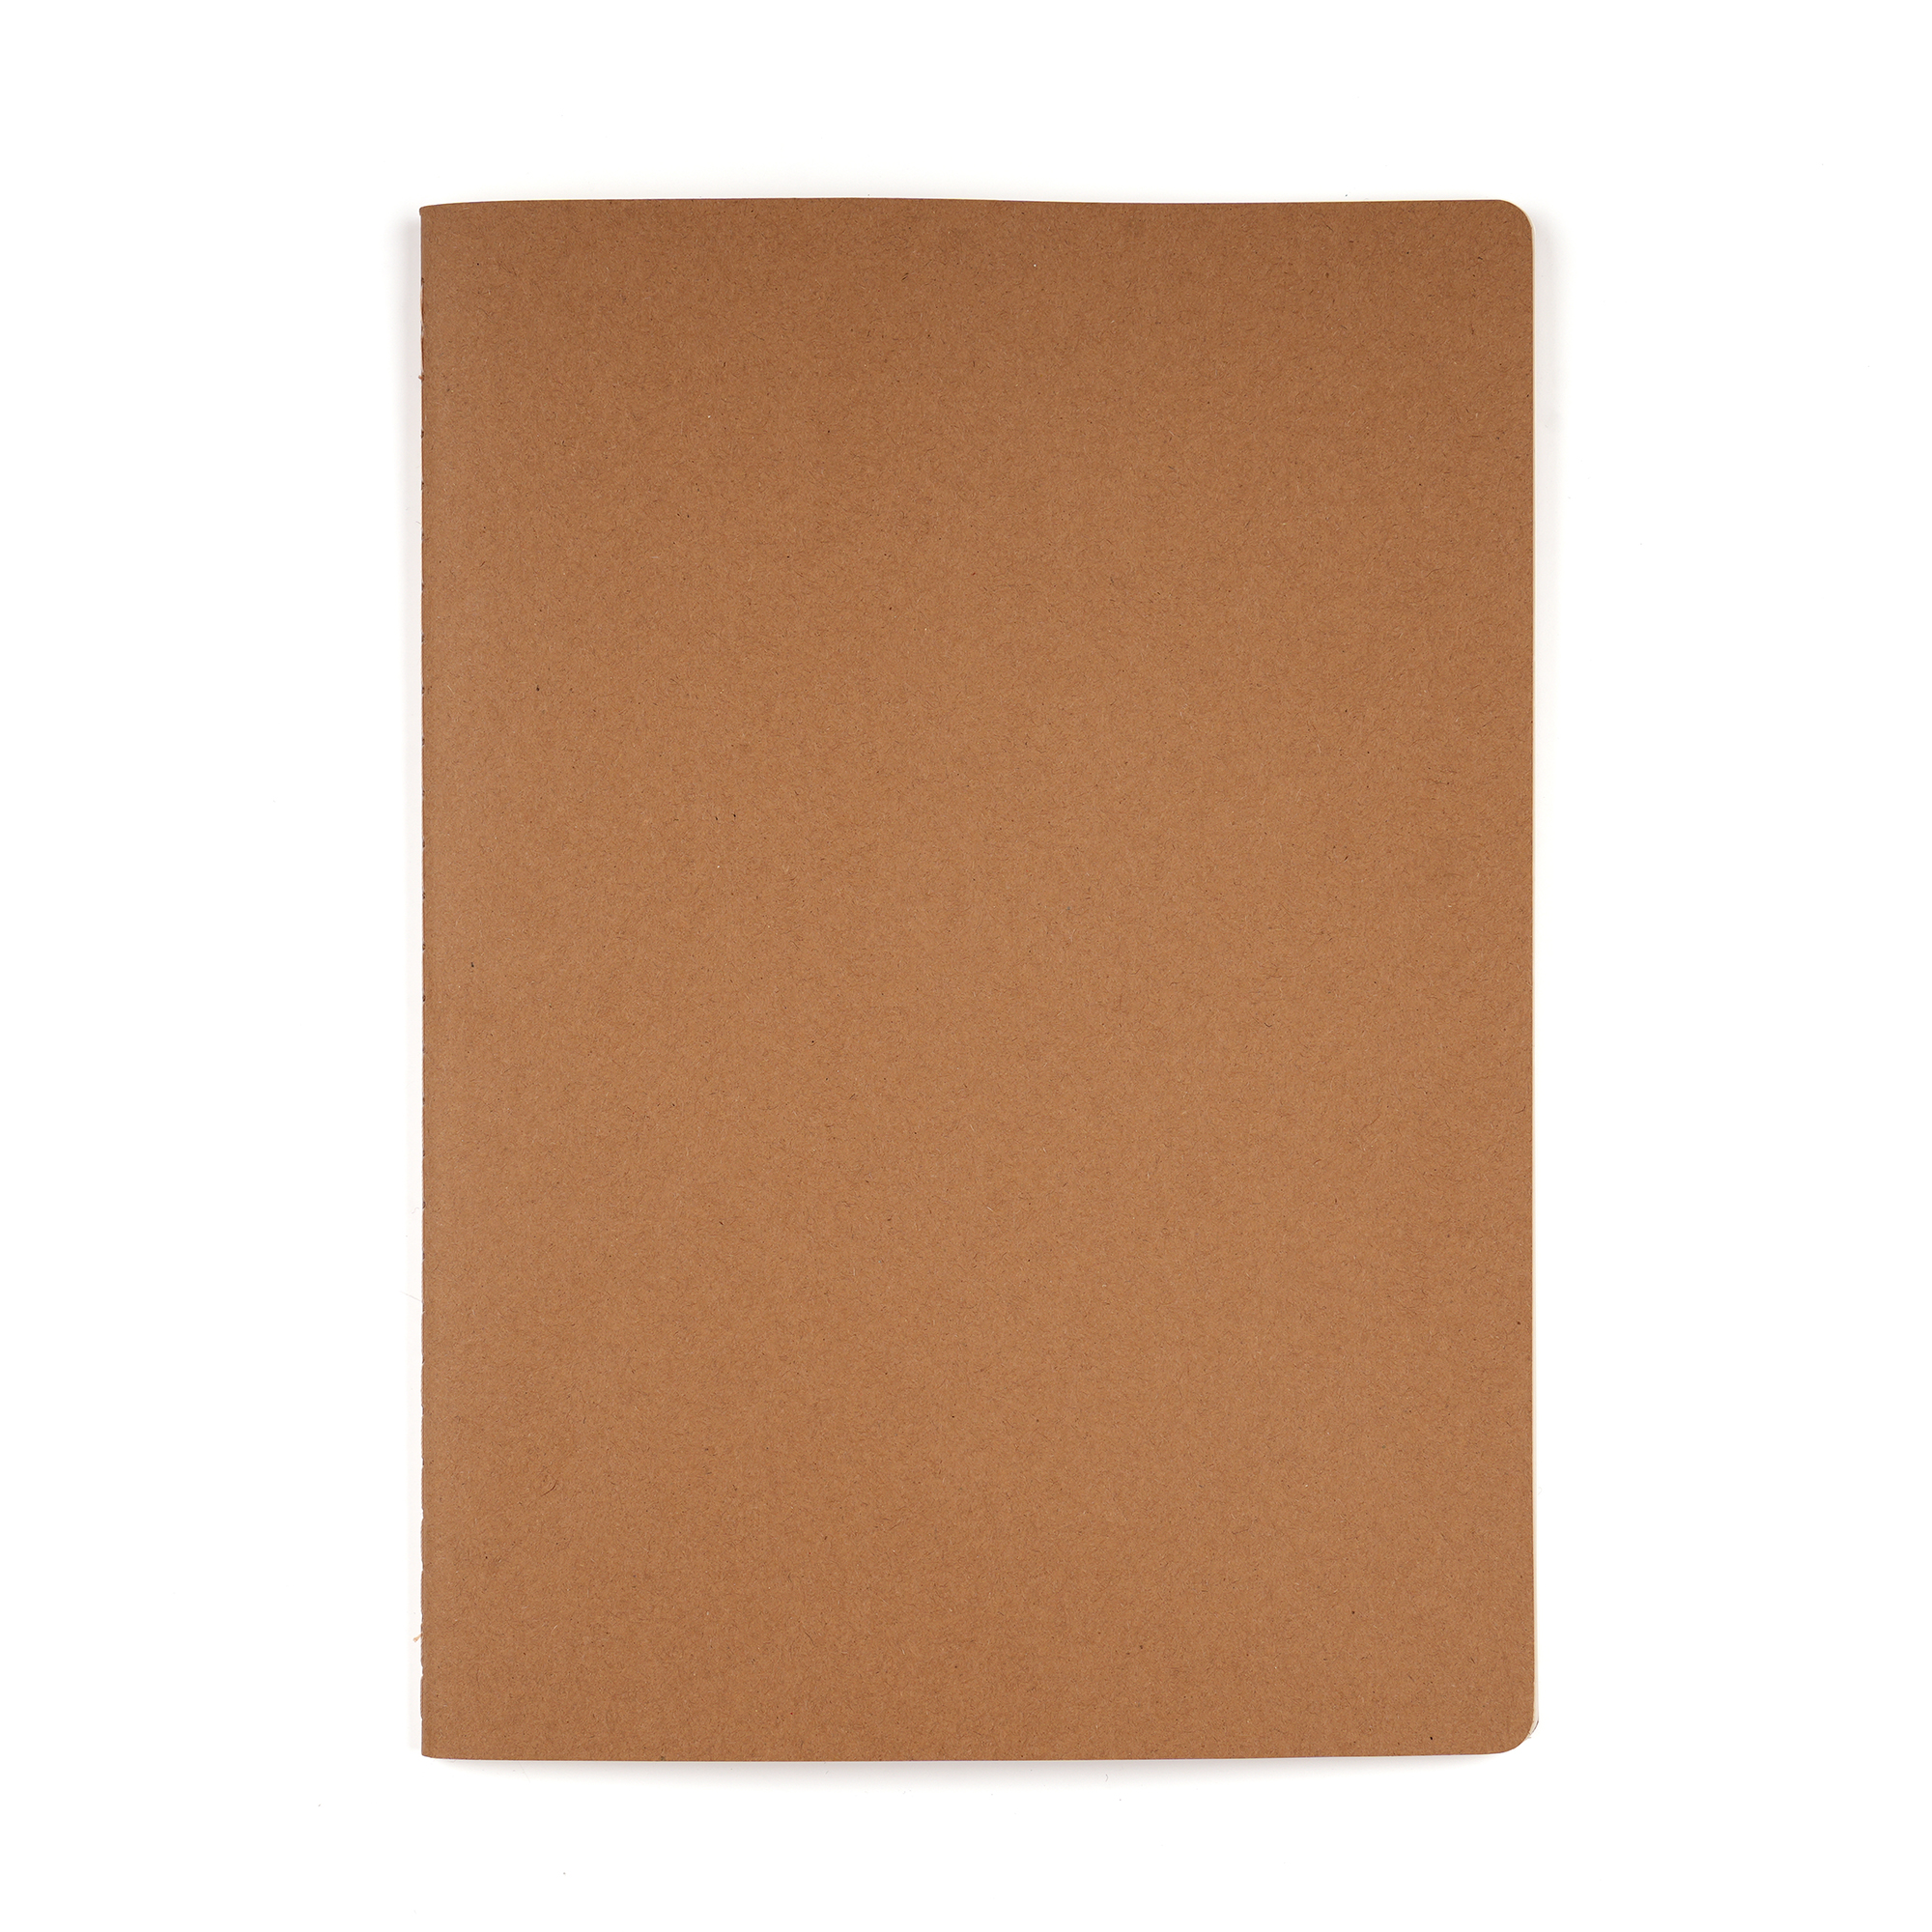 QS0018 3 - B6 Graphic Recycled Notebook